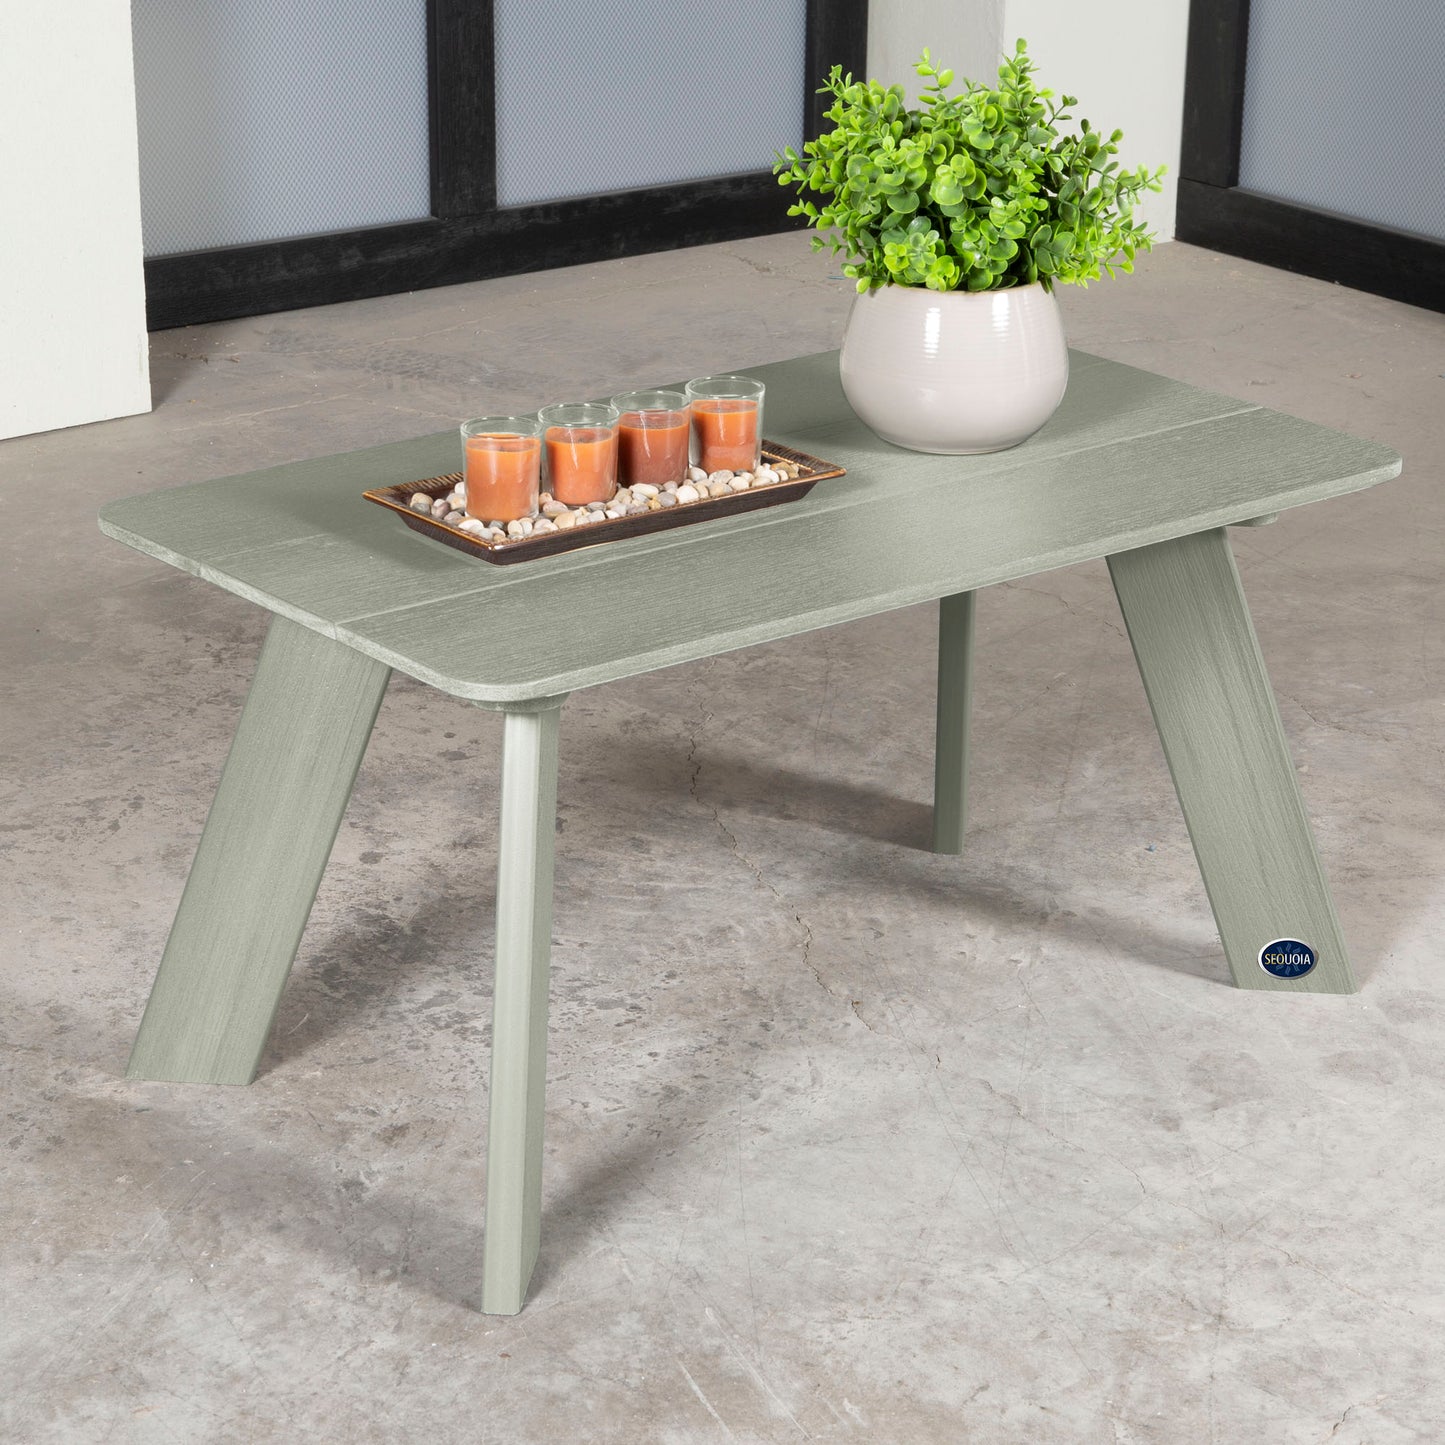 Light green Granite Hills coffee table with candles and plant